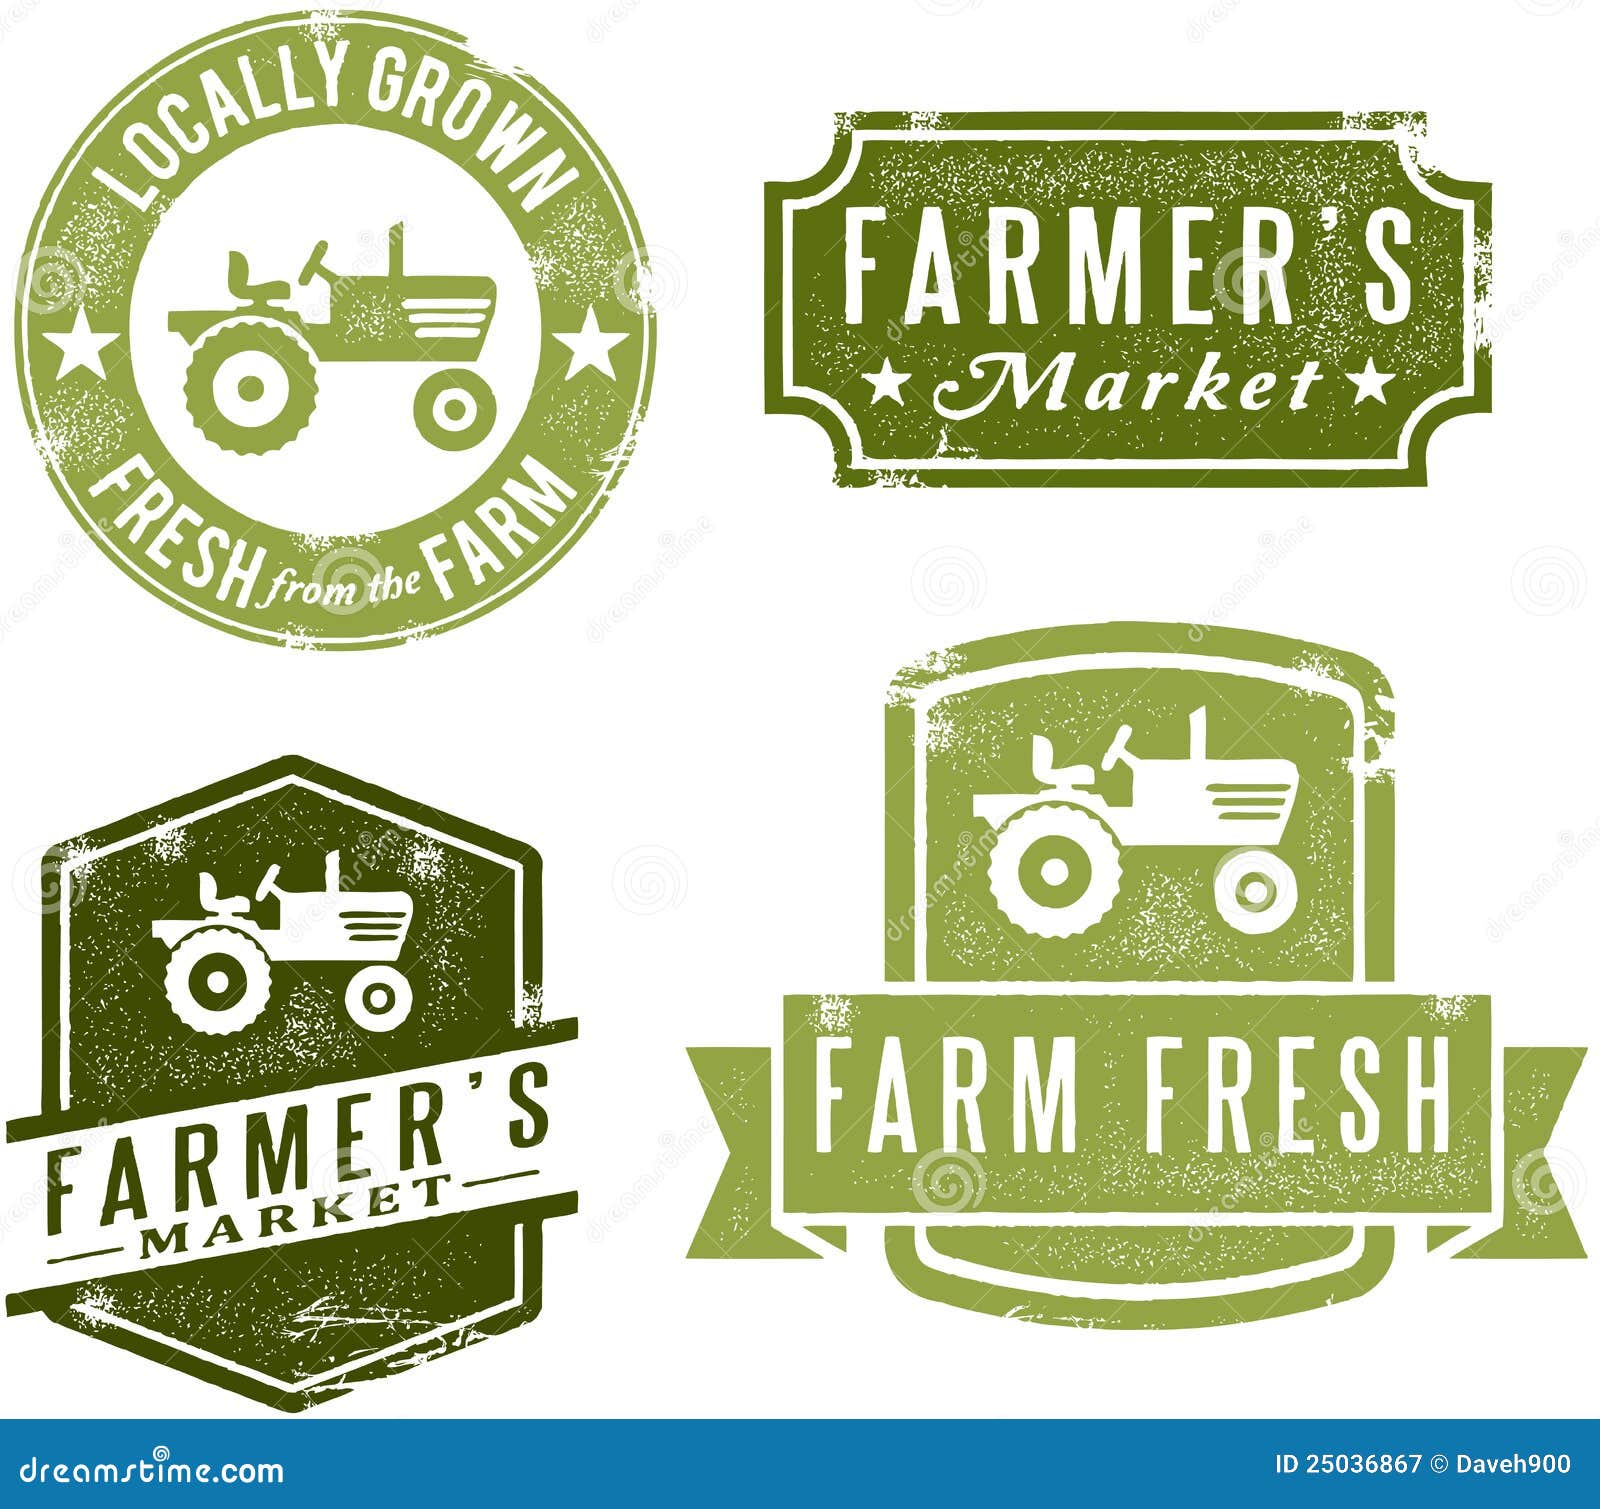 vintage style farmers market stamps